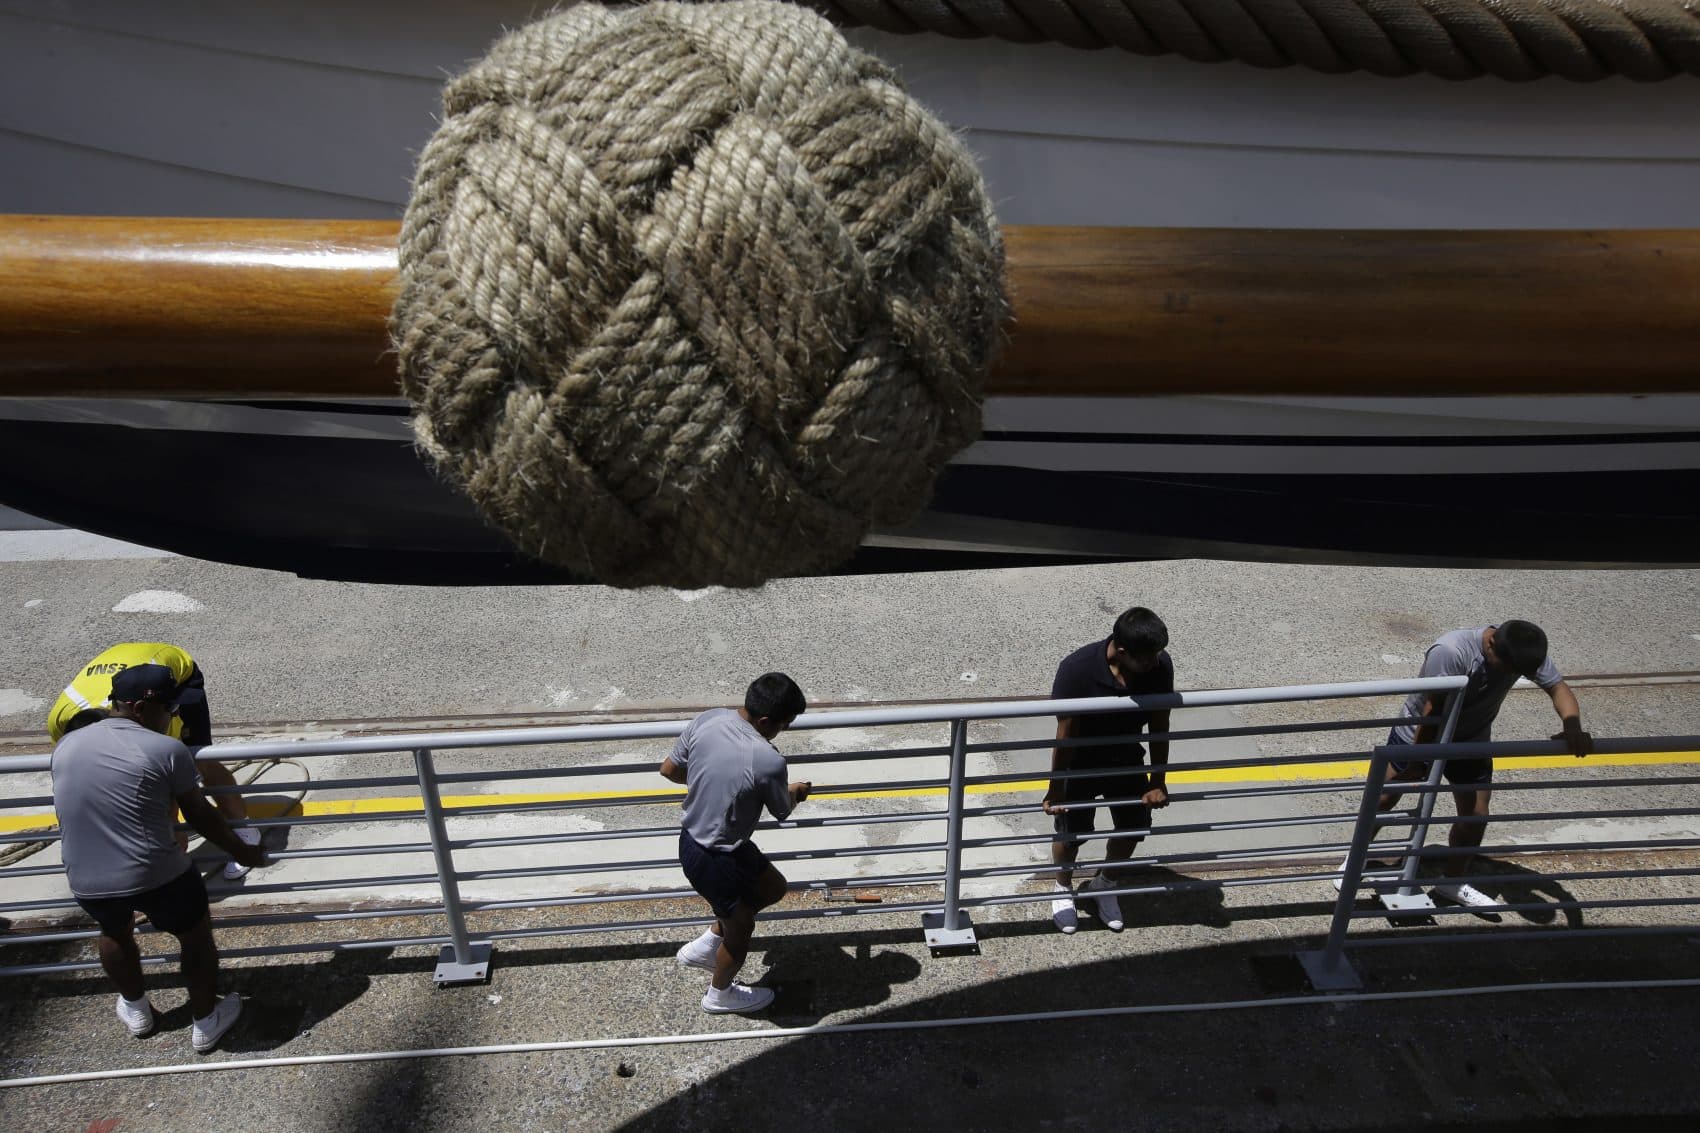 Crew members of the Peruvian Navy tall ship Union place a barrier on a dock near the vessel as the Union is docked in Boston Harbor on Sunday. (Steven Senne/AP)